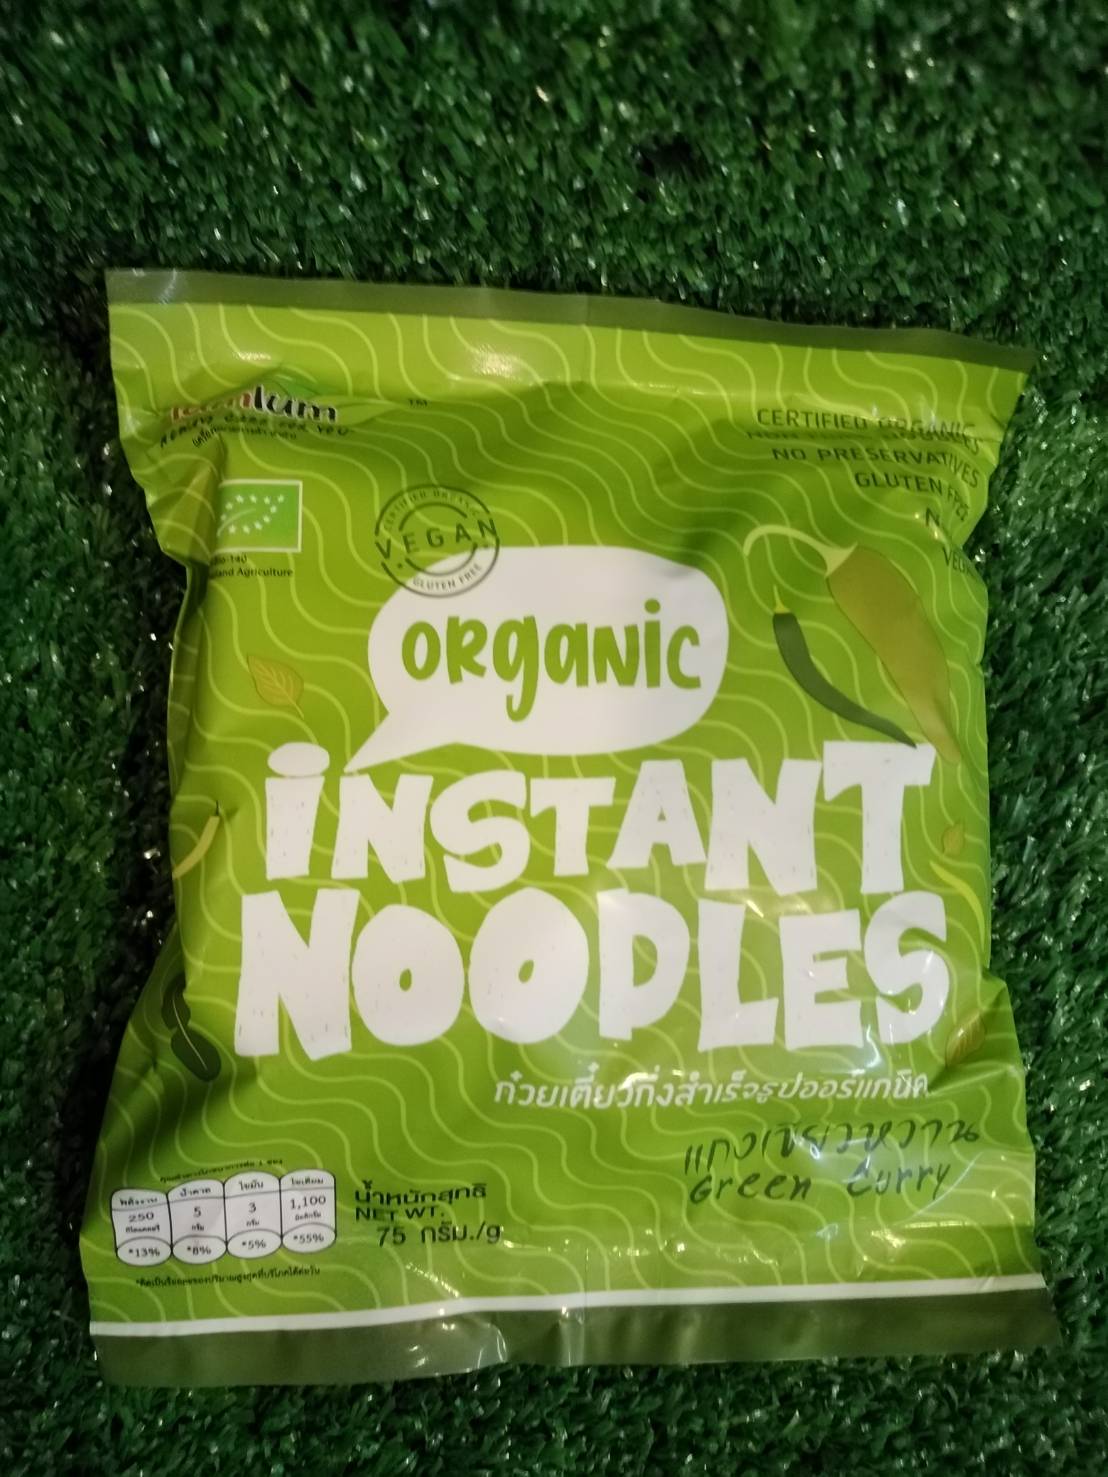 Organic Instant noodles Green Curry 75 g